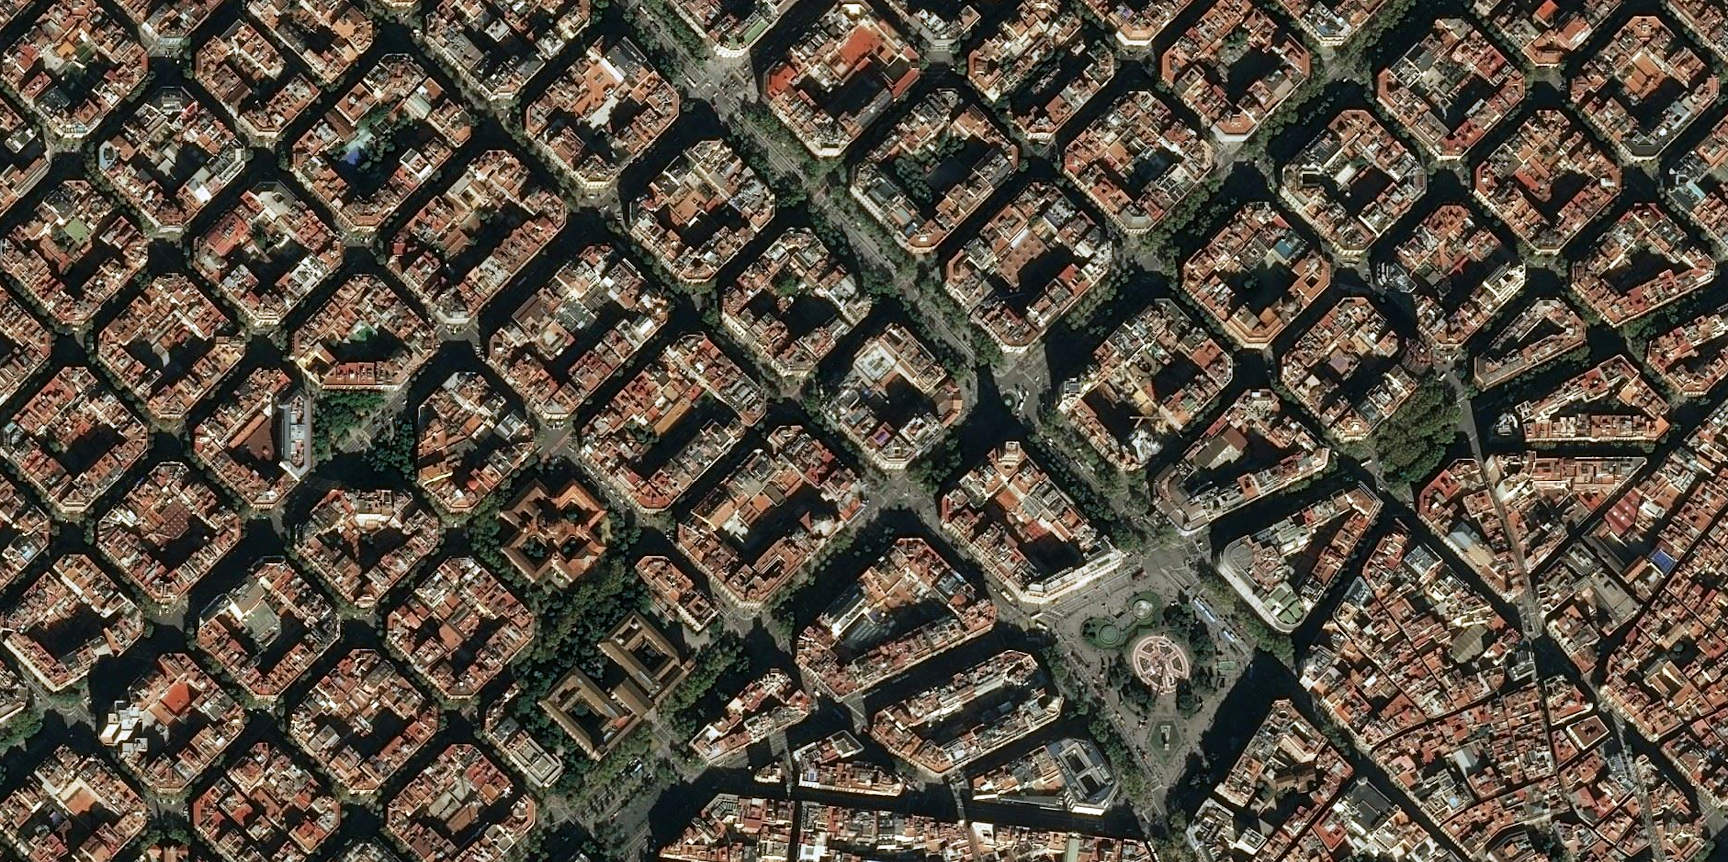 Enlarged view: City blocks in Barcelona ( CC BY-NC-ND 4.0 / o-media / OpenStreetMap / mapy.cz )